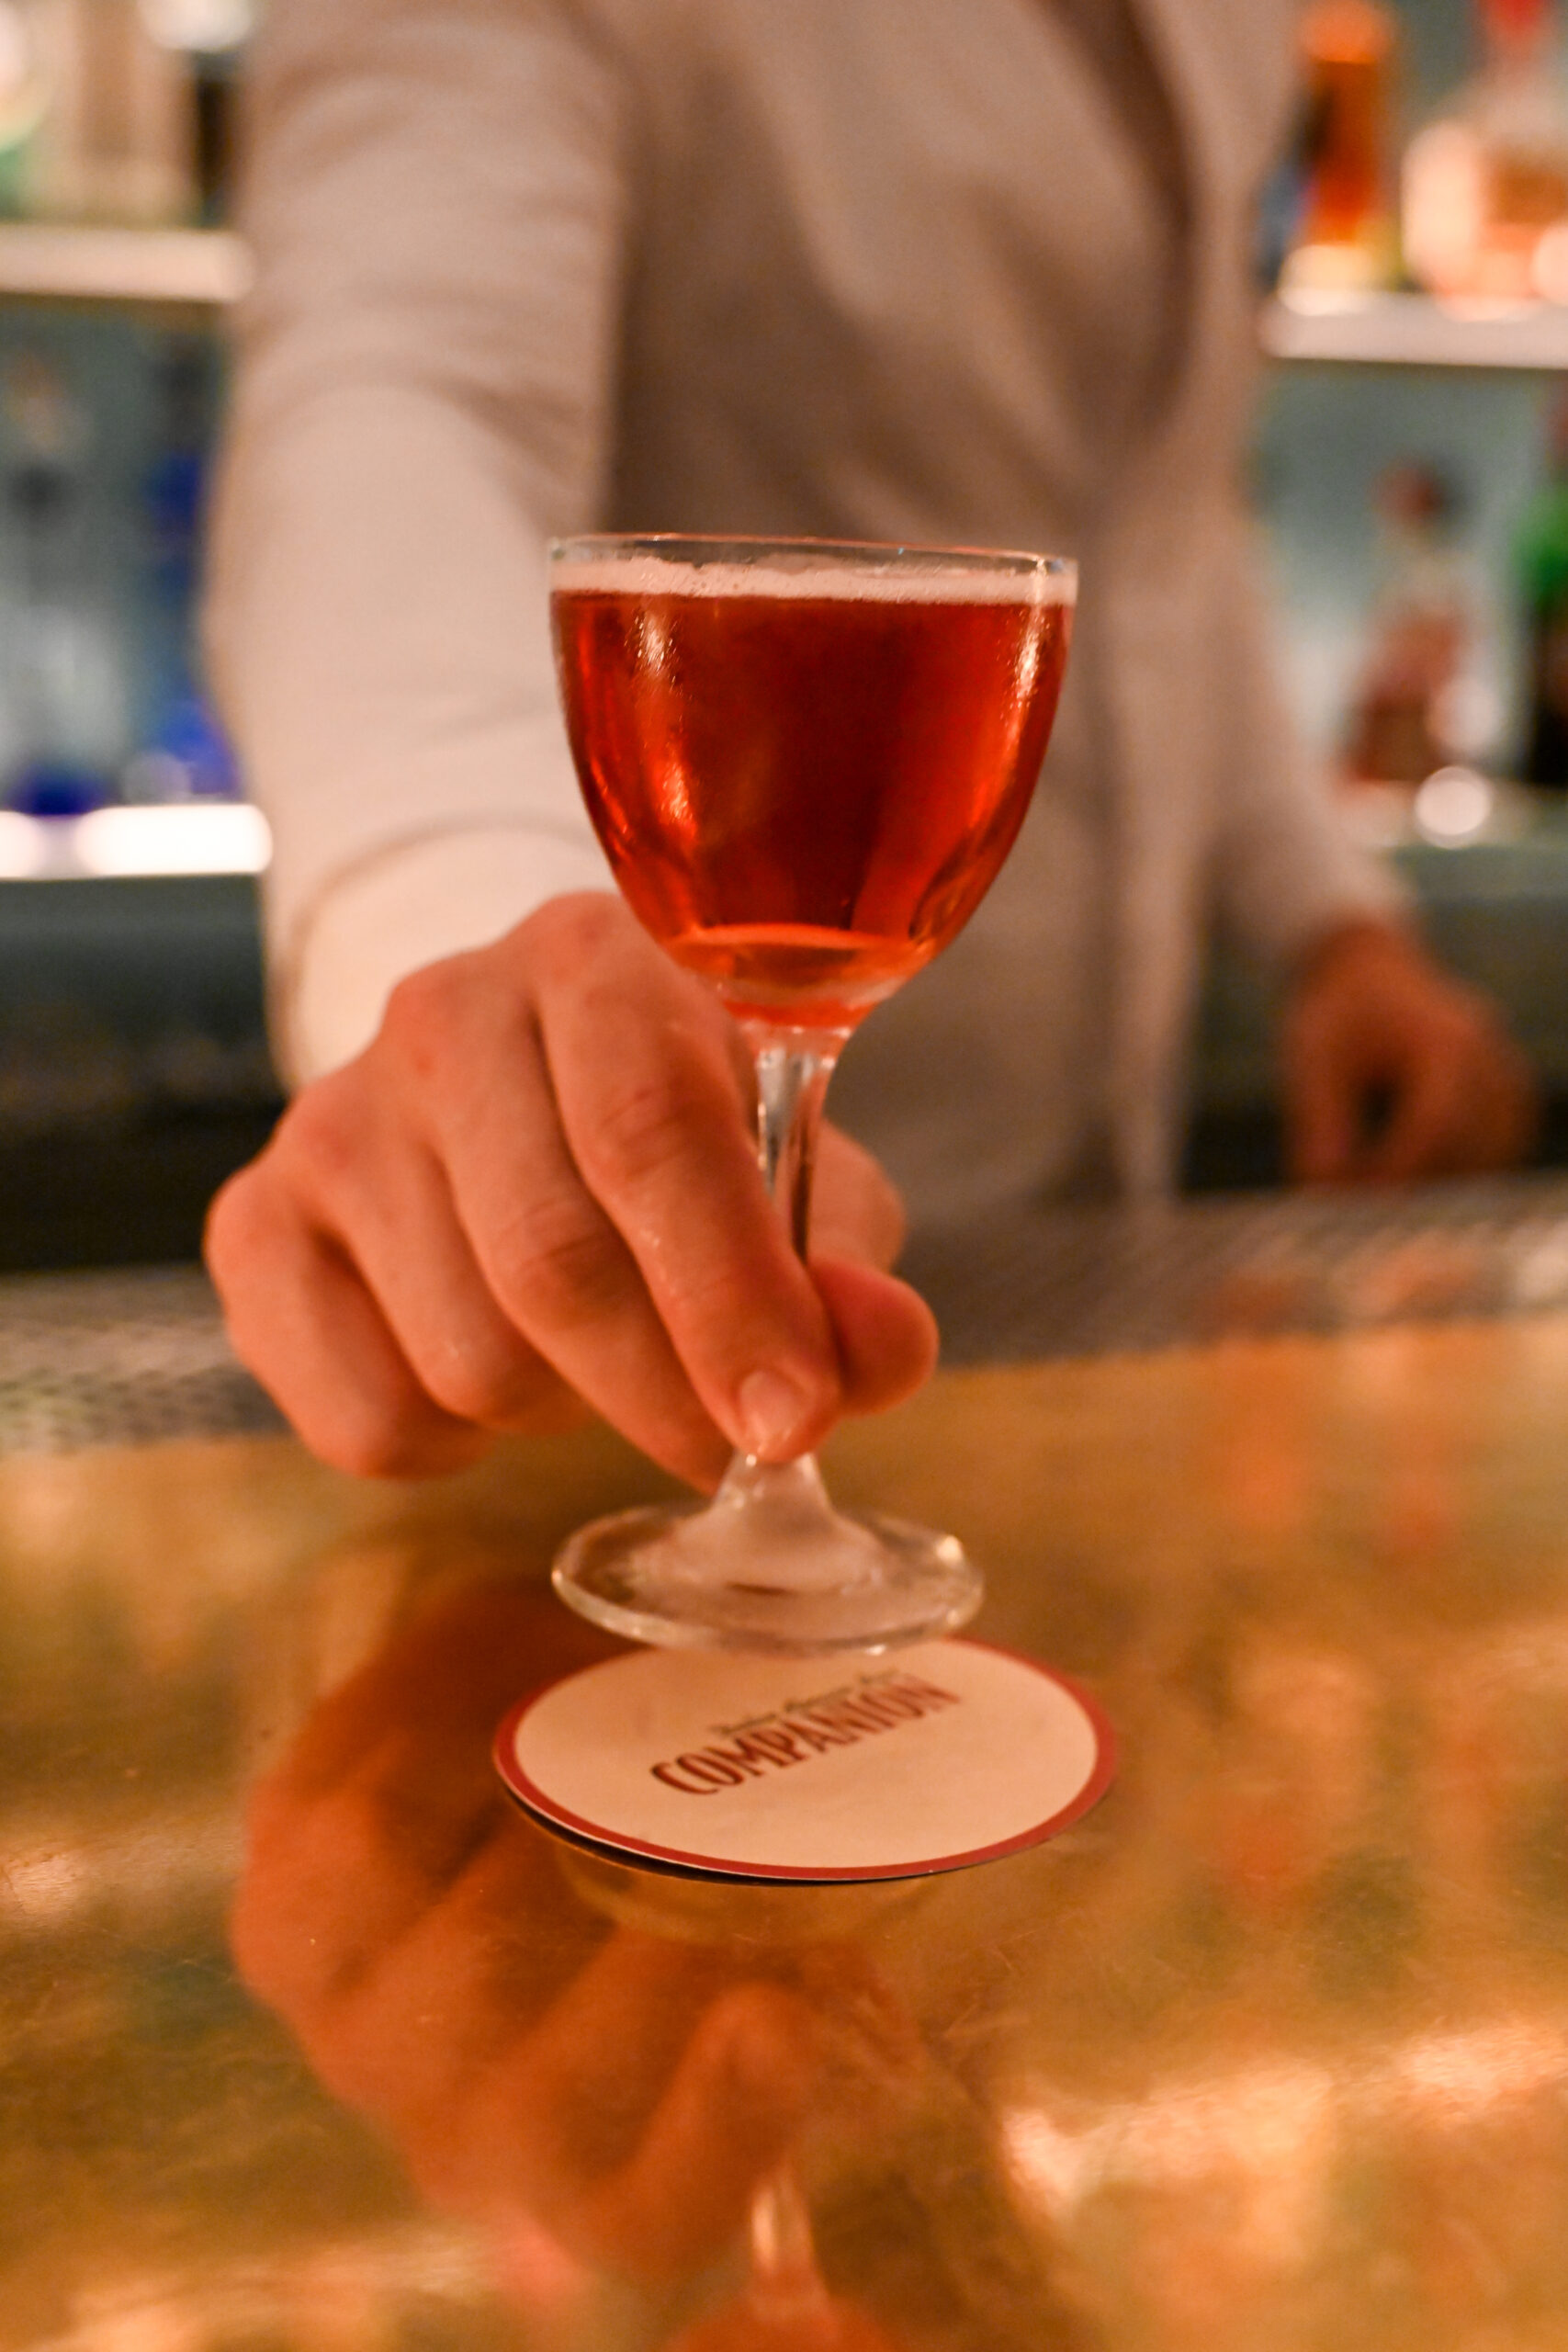 A drink being served by the bartender on a coaster with the logo Companion Dolce Amaro Bar on it.